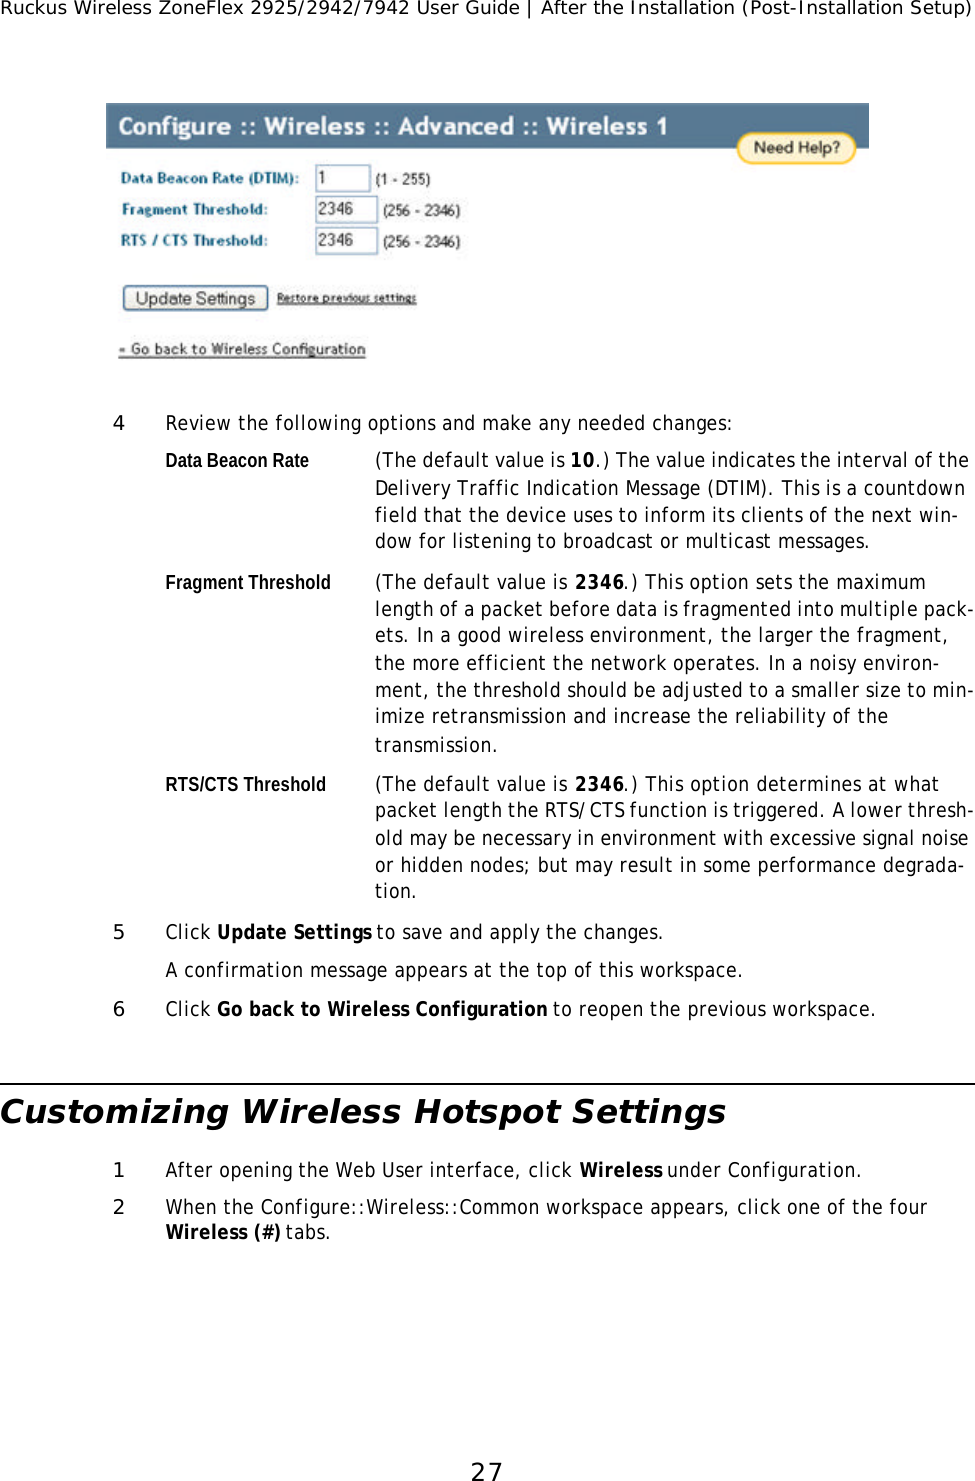 Ruckus Wireless ZoneFlex 2925/2942/7942 User Guide | After the Installation (Post-Installation Setup)274Review the following options and make any needed changes: Data Beacon Rate (The default value is 10.) The value indicates the interval of the Delivery Traffic Indication Message (DTIM). This is a countdown field that the device uses to inform its clients of the next win-dow for listening to broadcast or multicast messages. Fragment Threshold (The default value is 2346.) This option sets the maximum length of a packet before data is fragmented into multiple pack-ets. In a good wireless environment, the larger the fragment, the more efficient the network operates. In a noisy environ-ment, the threshold should be adjusted to a smaller size to min-imize retransmission and increase the reliability of the transmission.RTS/CTS Threshold (The default value is 2346.) This option determines at what packet length the RTS/CTS function is triggered. A lower thresh-old may be necessary in environment with excessive signal noise or hidden nodes; but may result in some performance degrada-tion. 5Click Update Settings to save and apply the changes.A confirmation message appears at the top of this workspace. 6Click Go back to Wireless Configuration to reopen the previous workspace.Customizing Wireless Hotspot Settings 1After opening the Web User interface, click Wireless under Configuration.2When the Configure::Wireless::Common workspace appears, click one of the four Wireless (#) tabs.